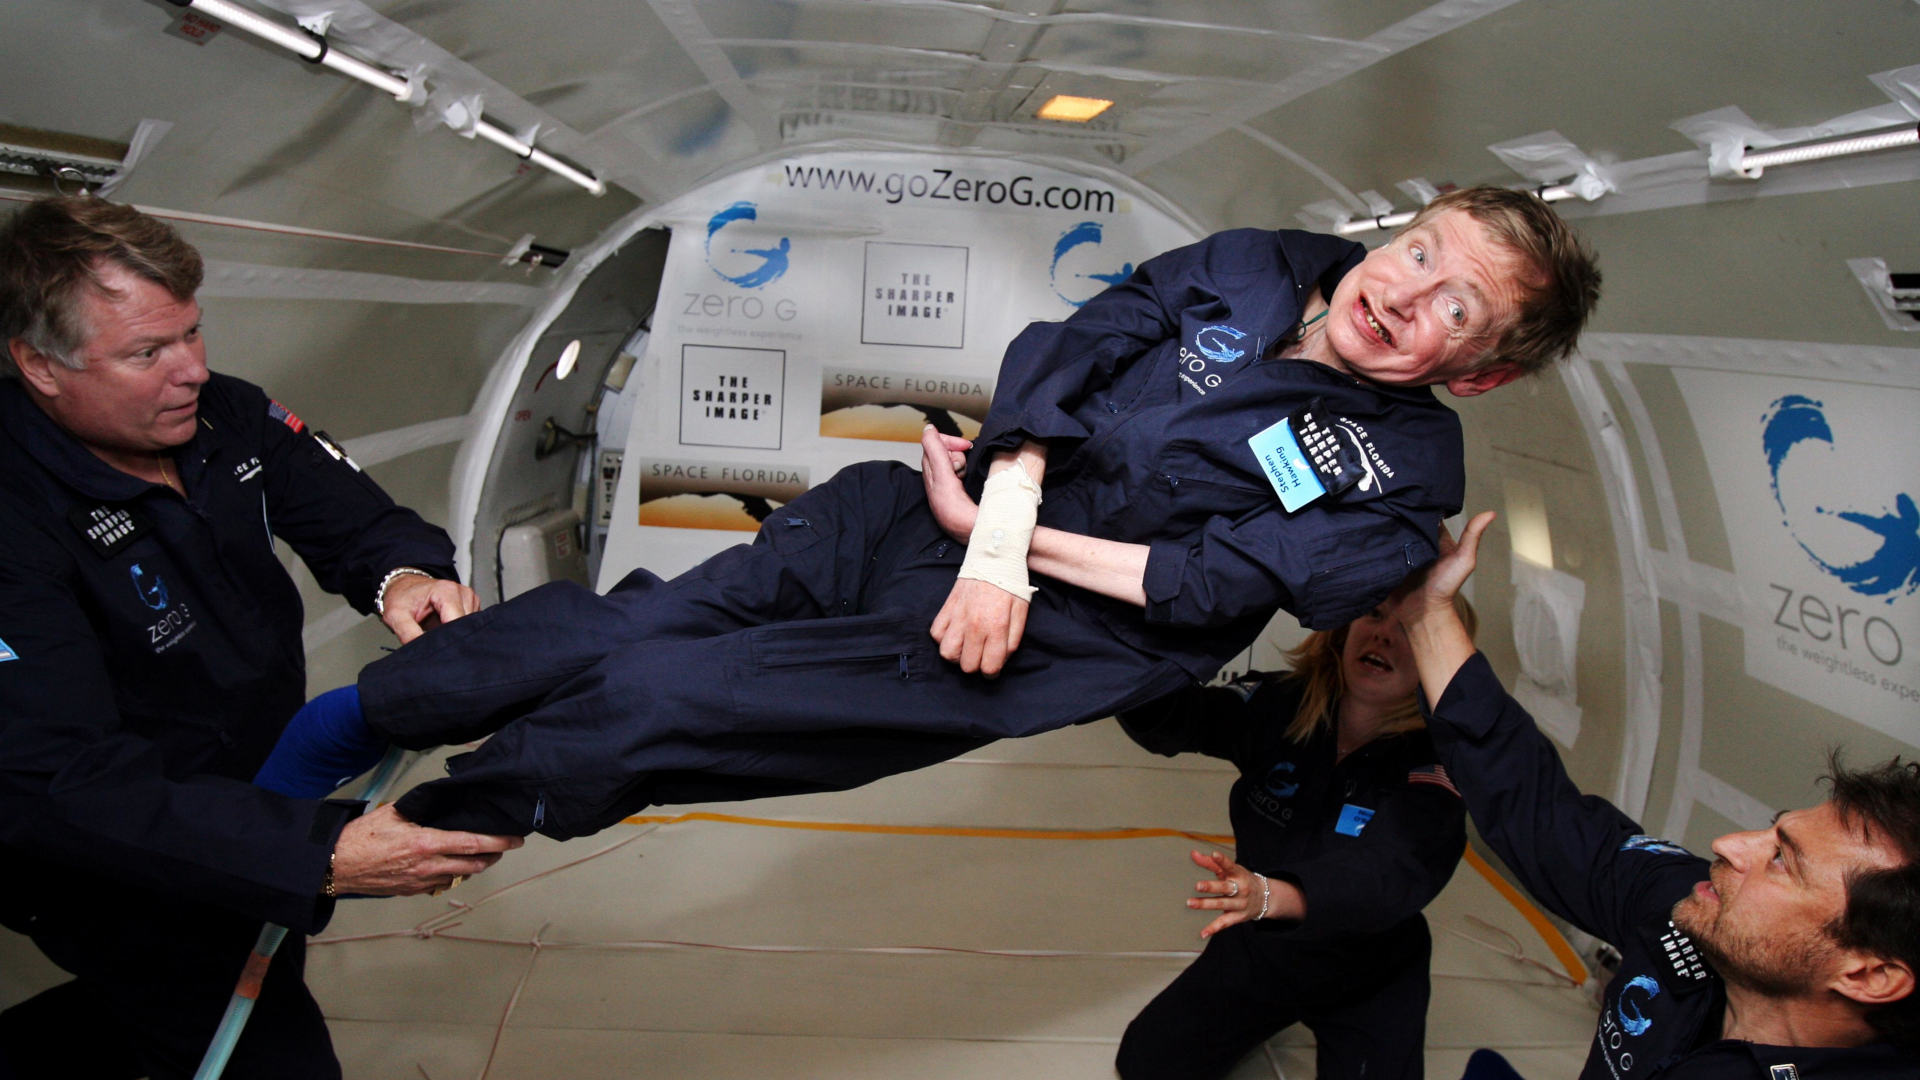 Stephen Hawking experiences zero gravity during a flight aboard a modified Boeing 727.